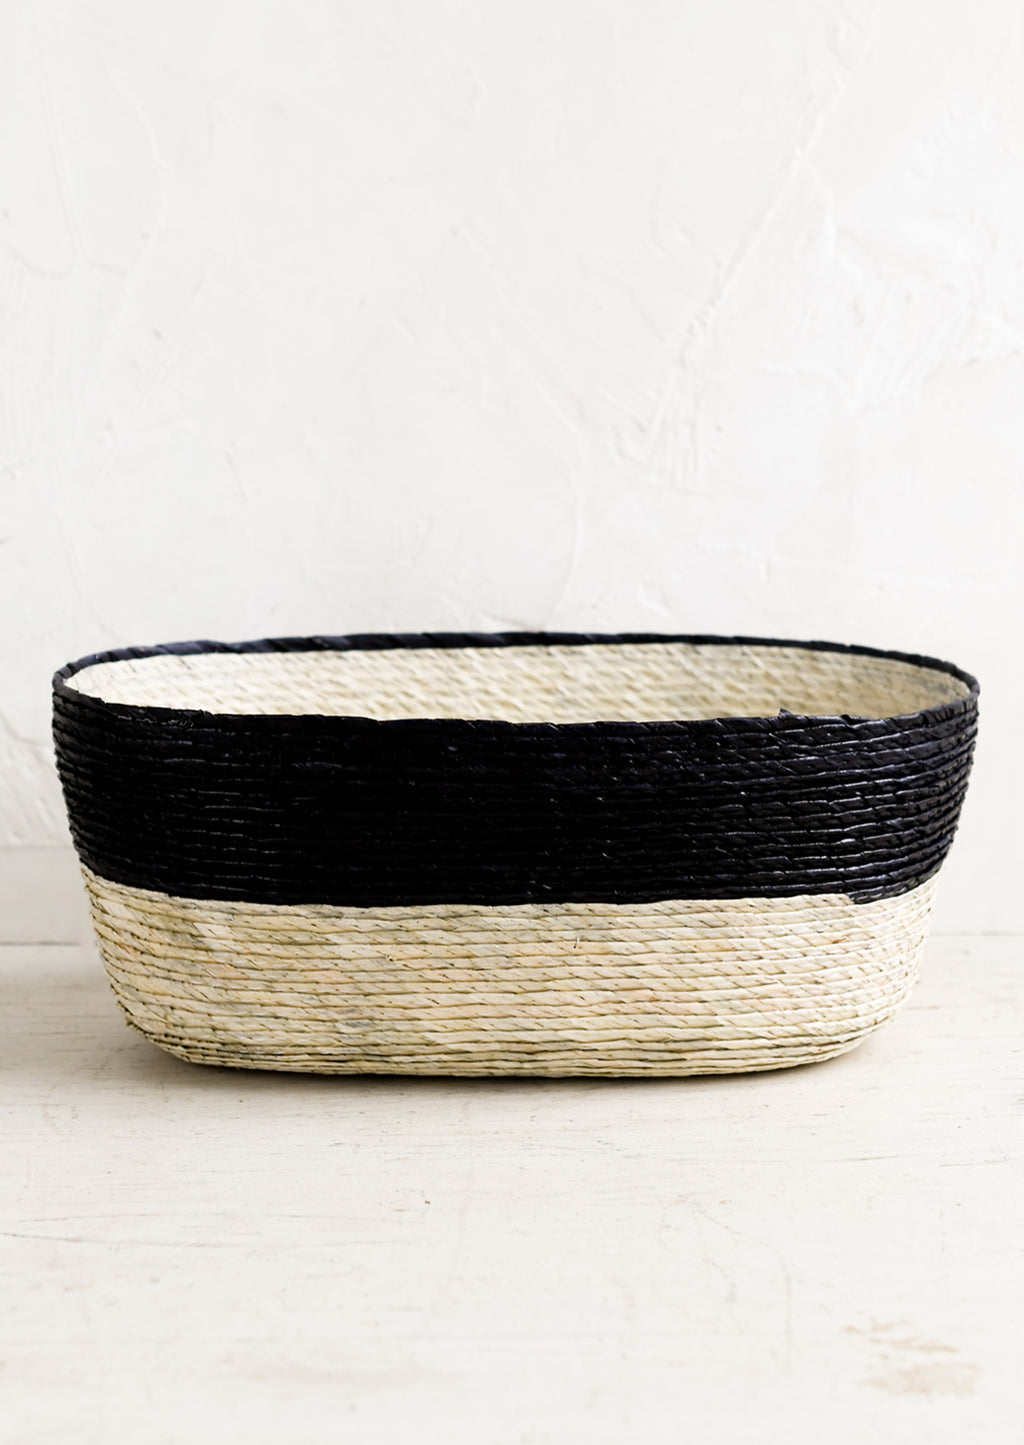 Carbon: A two-tone oval shaped storage basket in natural and carbon.